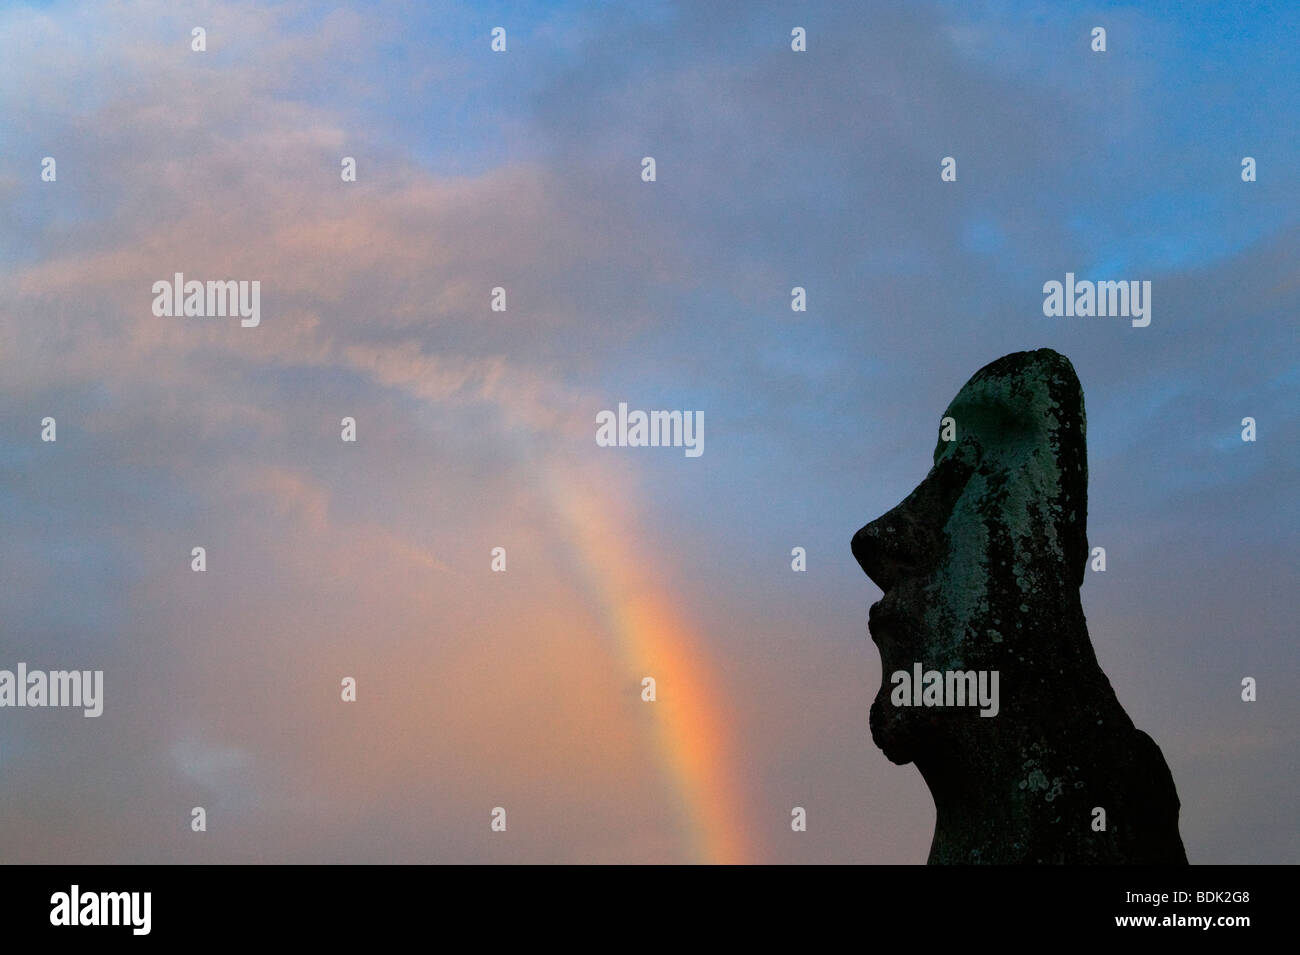 A lone Moai (volcanic stone sculptures) with rainbow at Ahu Tongariki, Easter Island, Chile Stock Photo